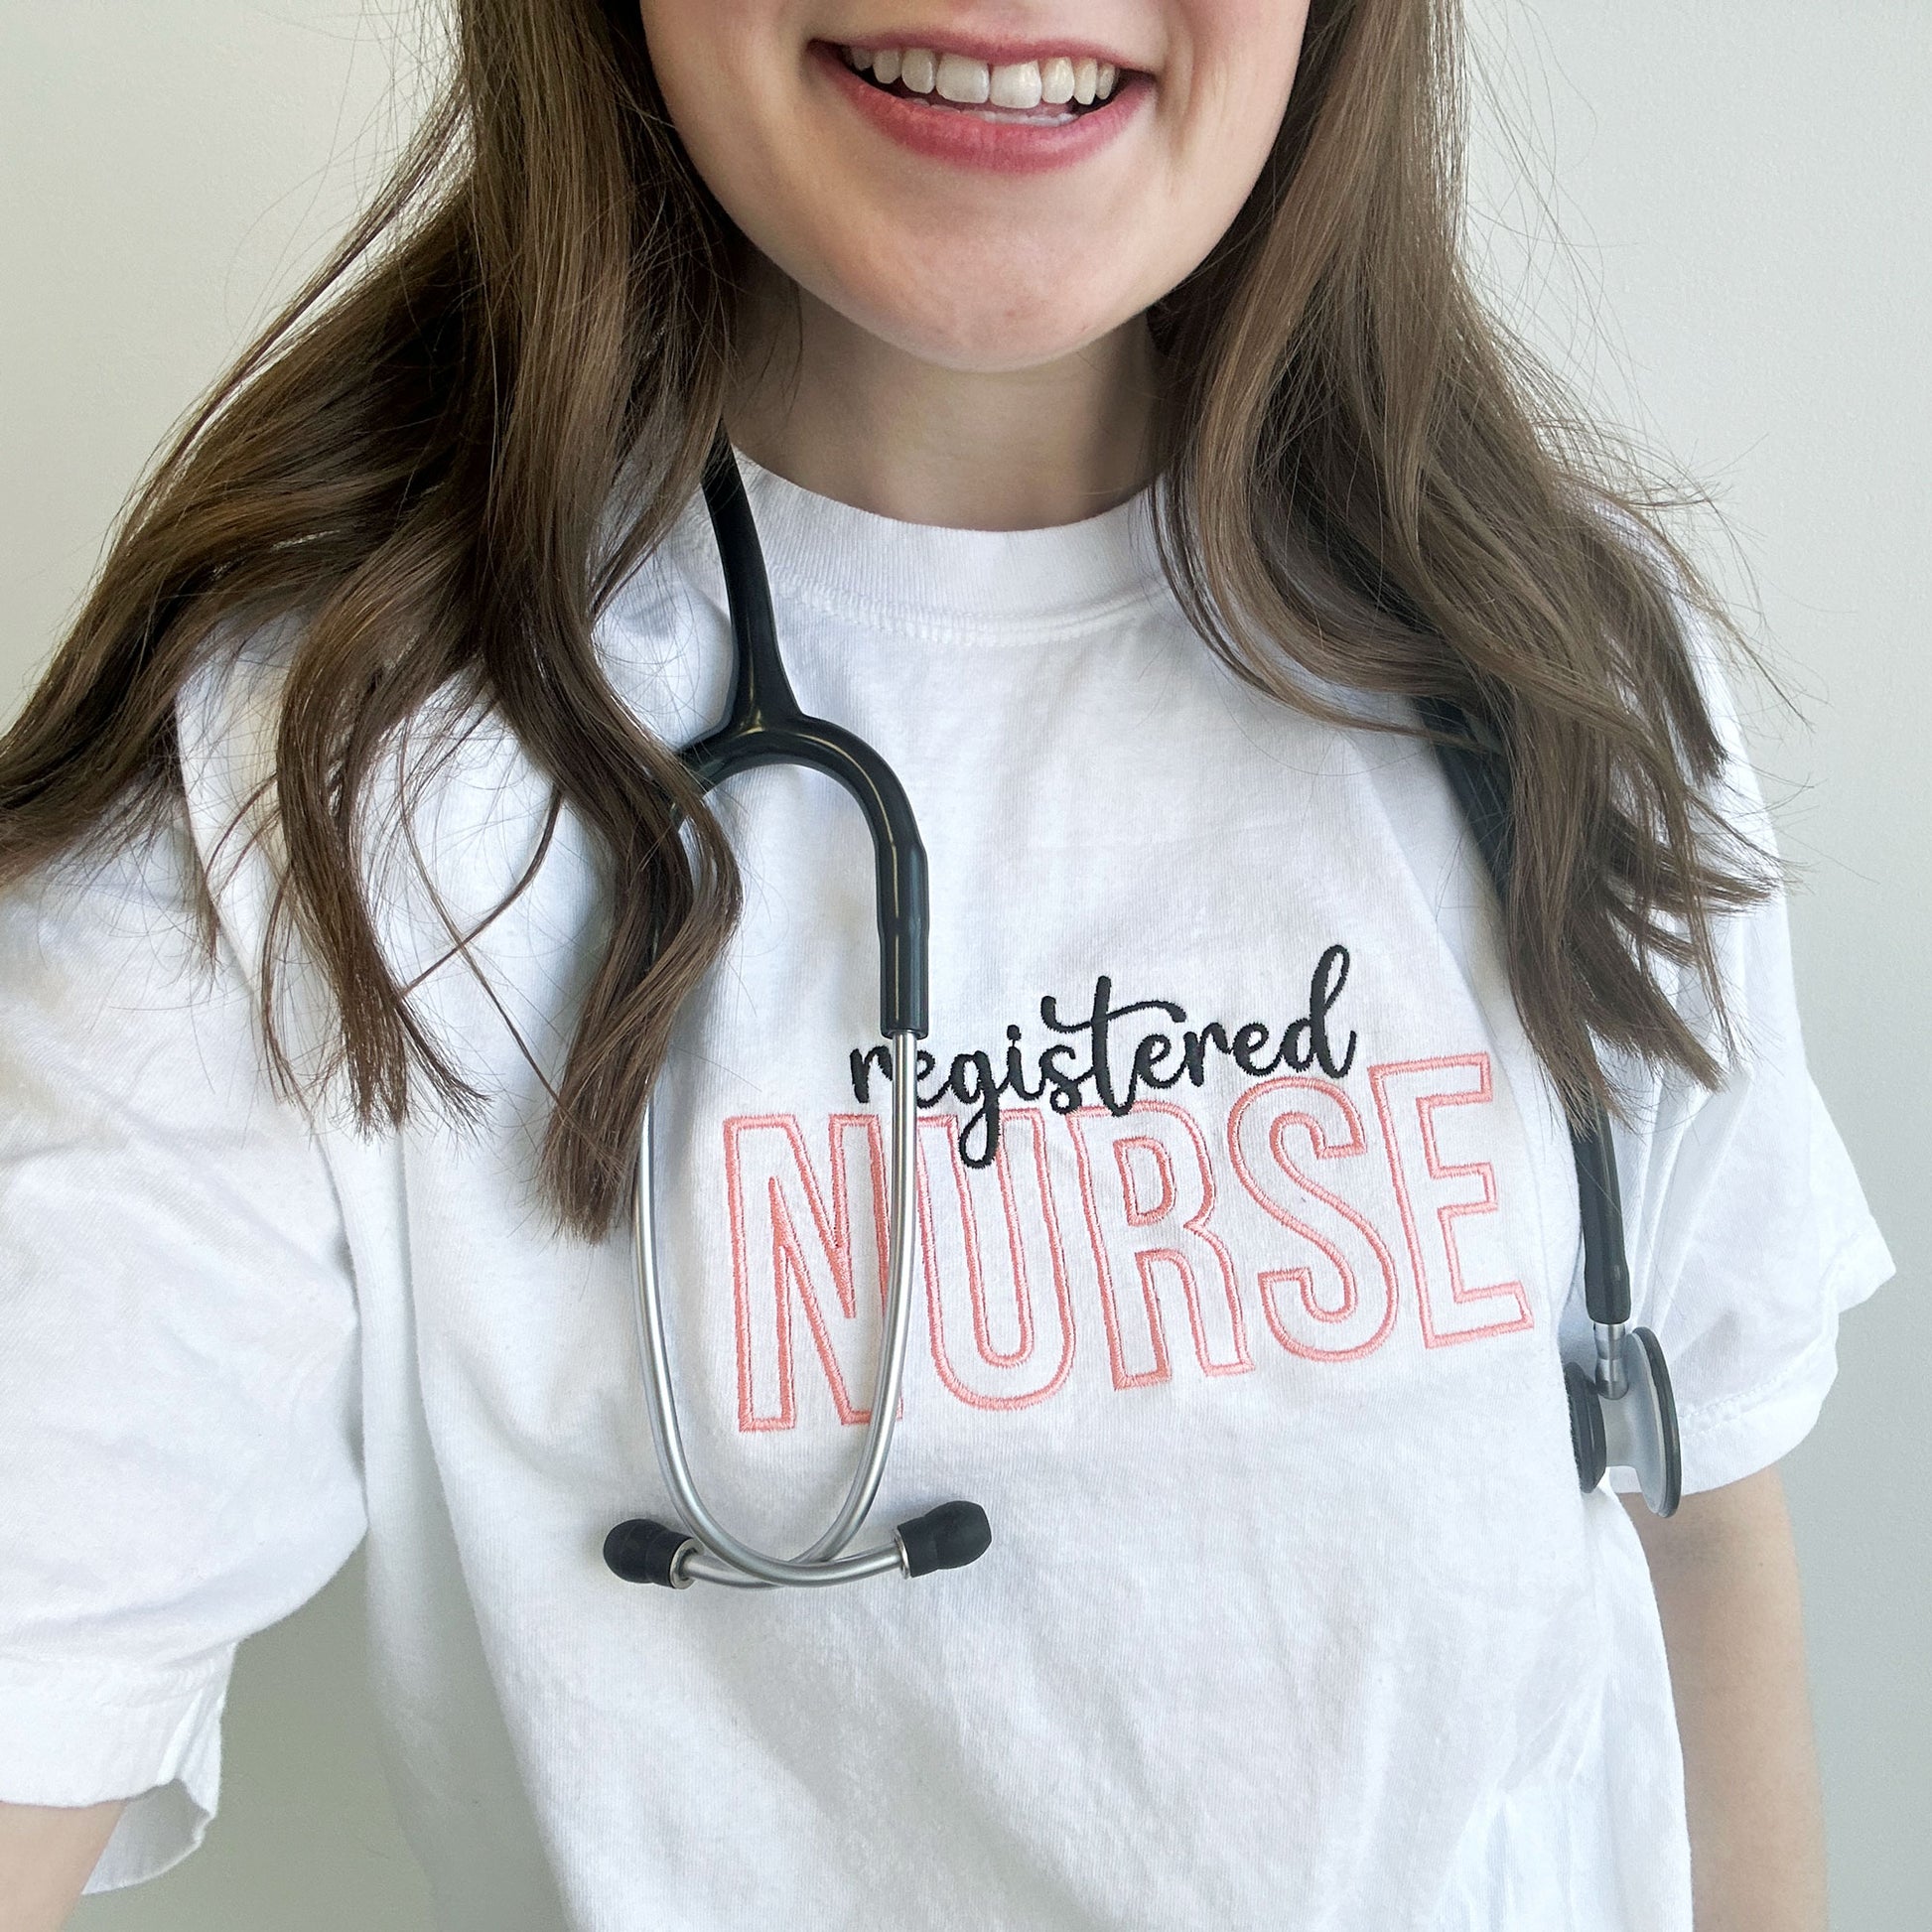 close up of a Young woman wearing a white comfort colors t-shirt with custom text registered nurse embroidered design across the chest in black and coral pink threads.